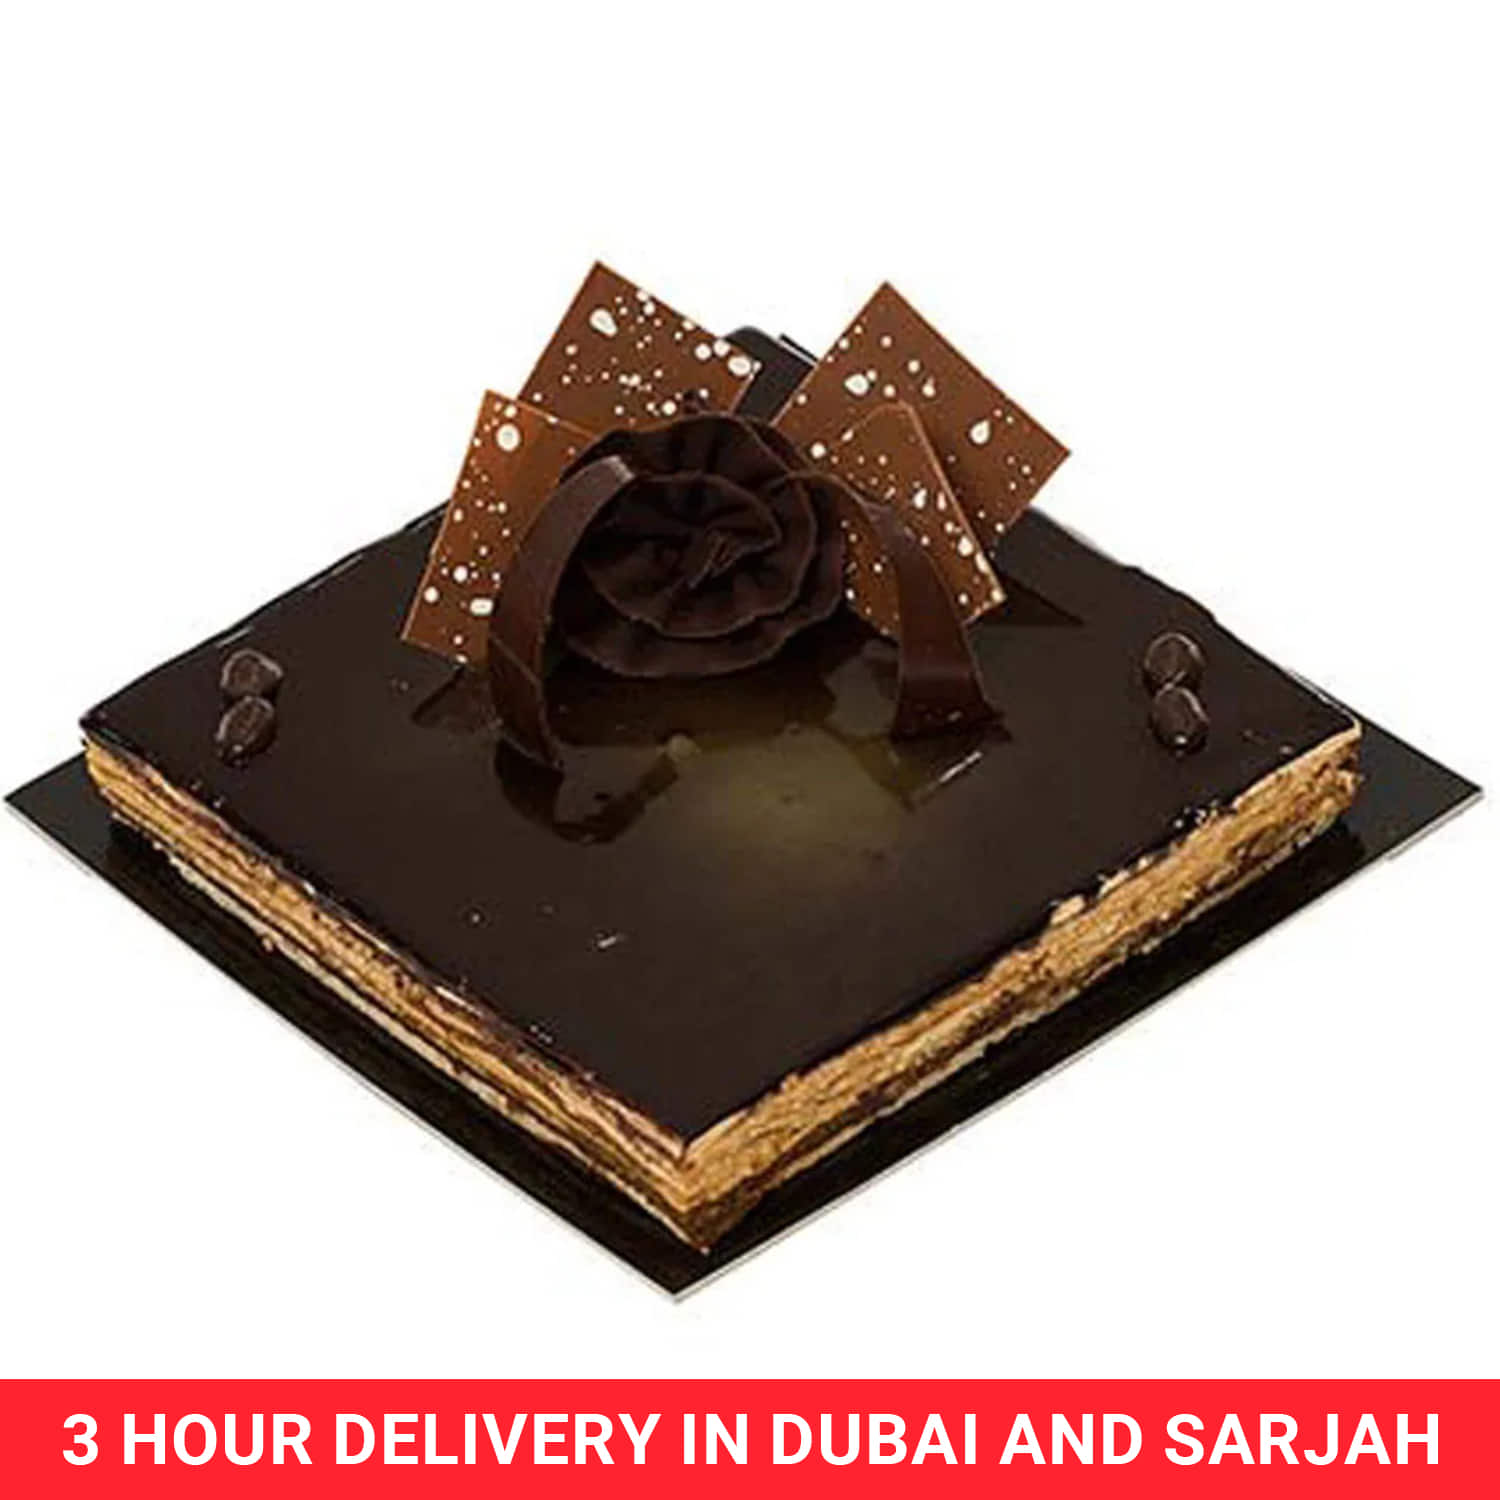 Order Half Kg Cakes Online, Same Day Delivery Dubai, UAE, Birthday Cakes -  GDO Gifts